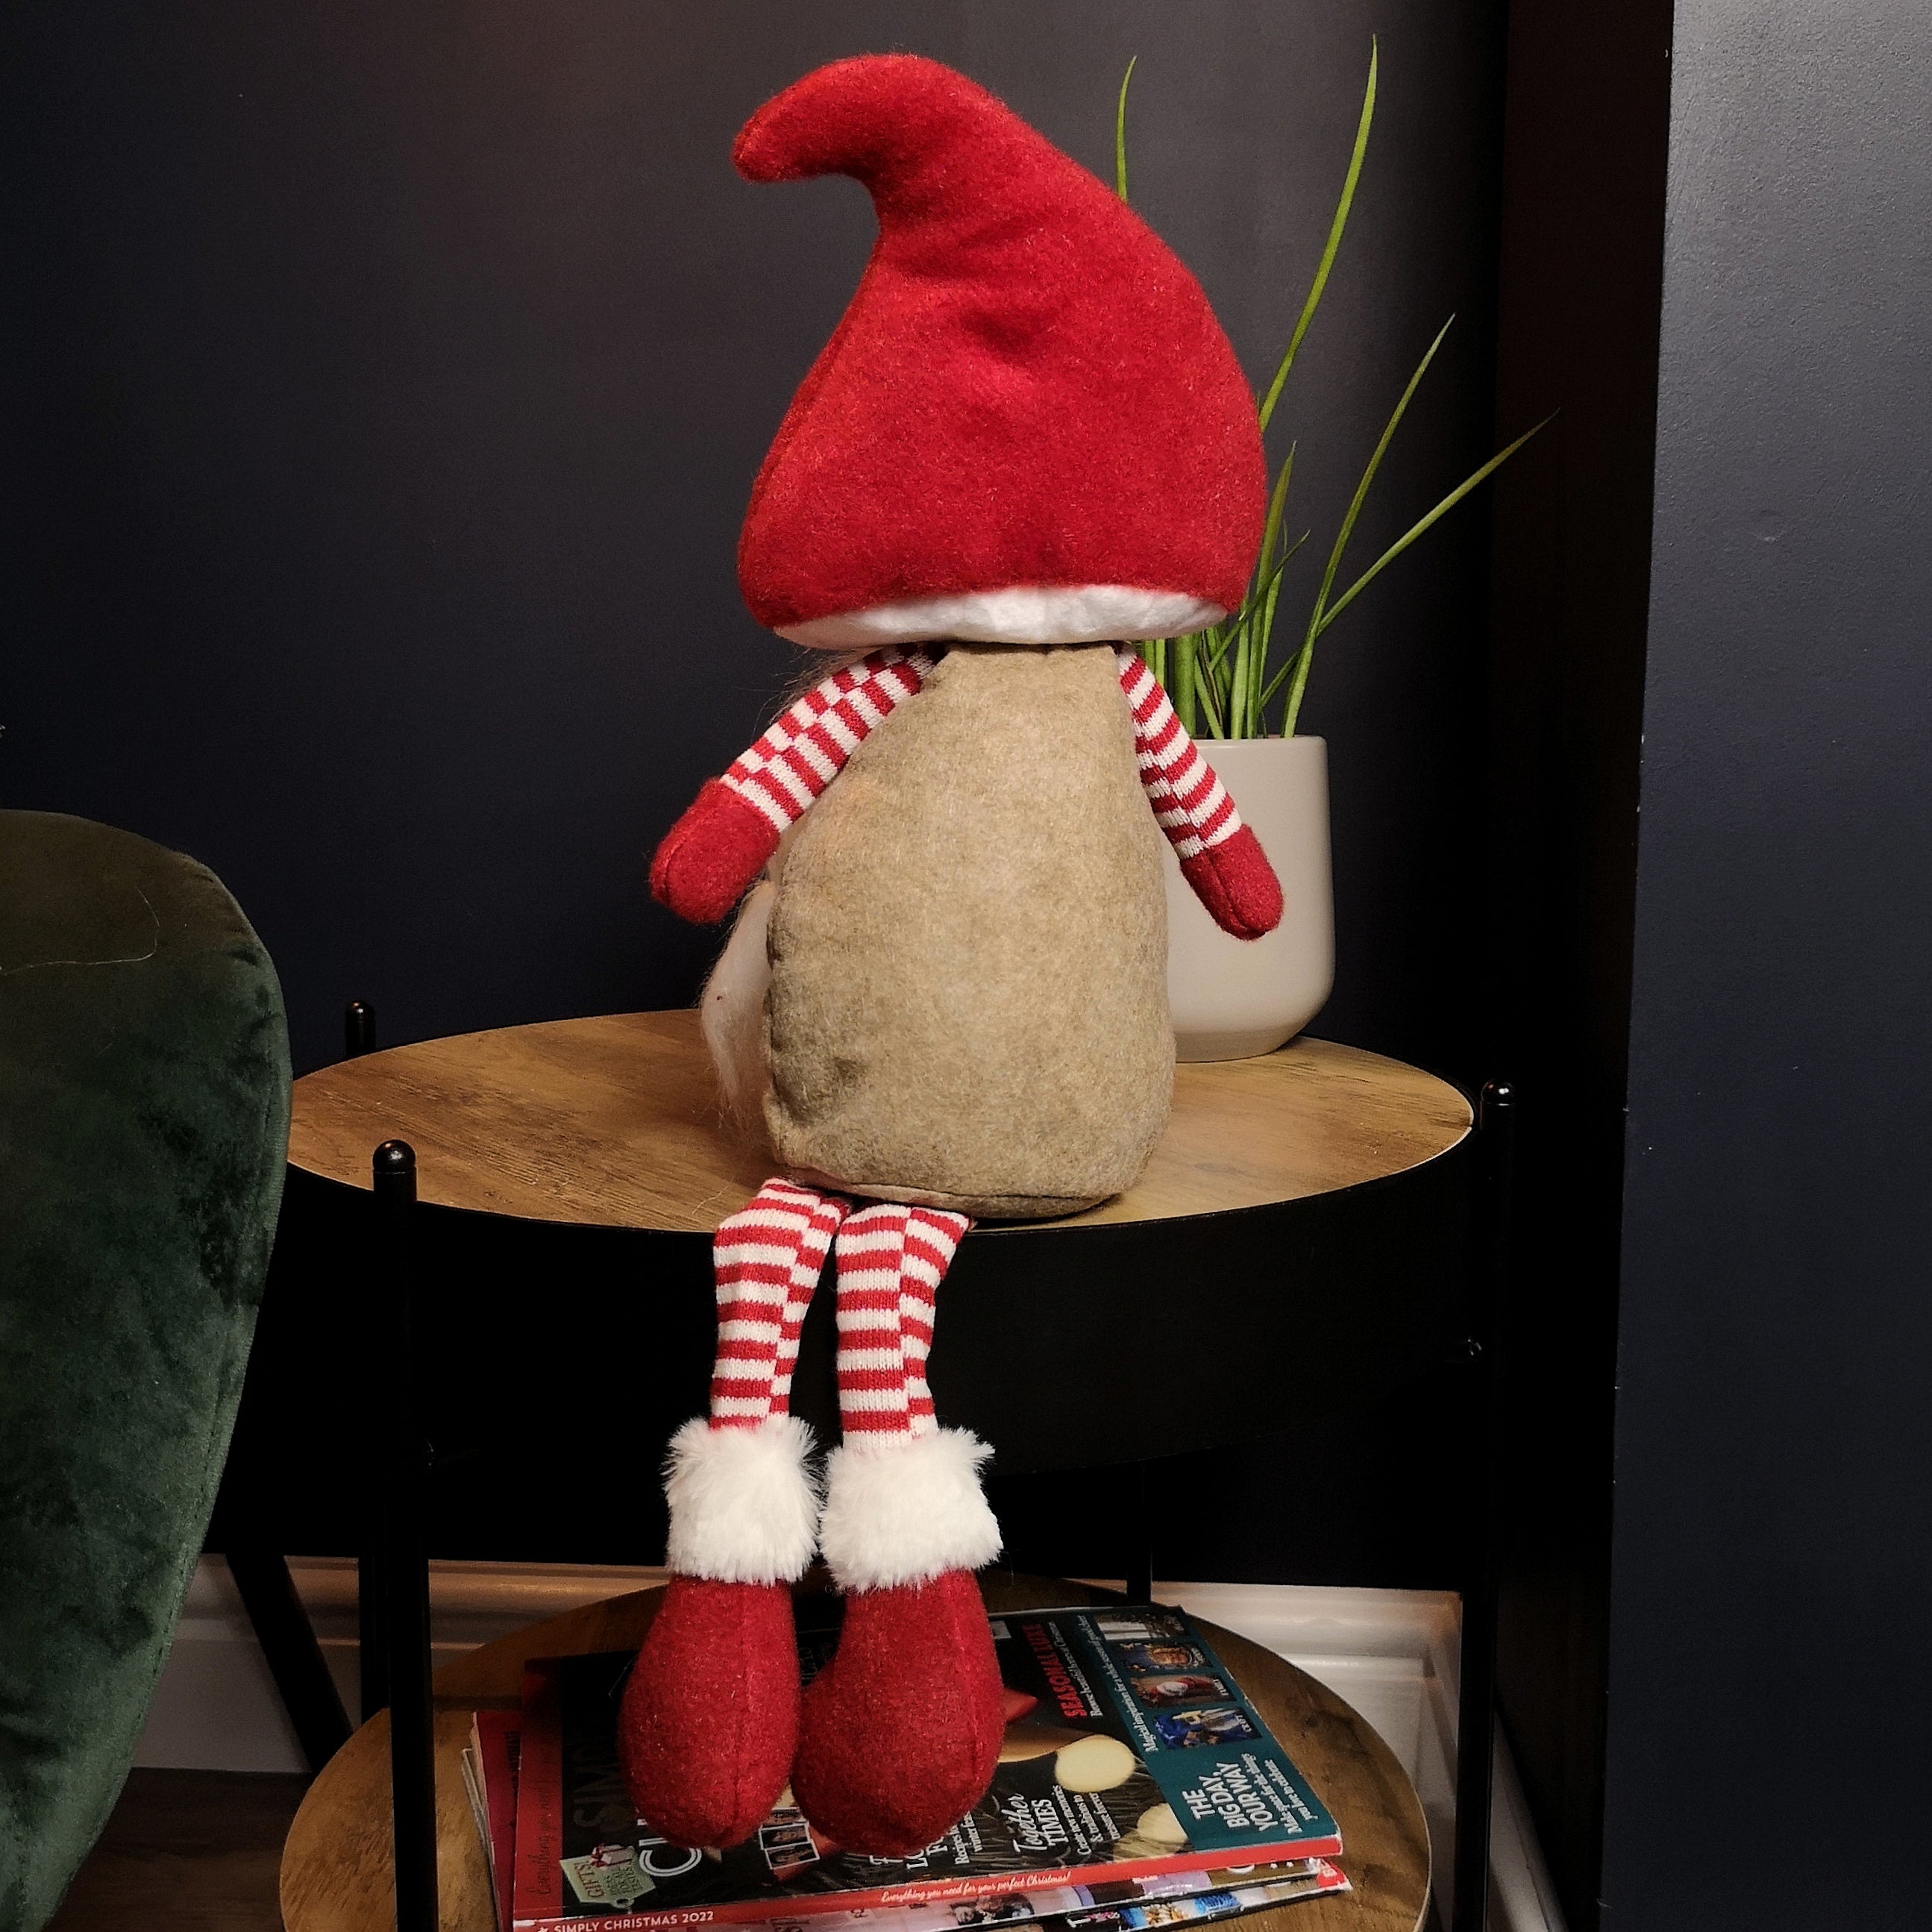 53cm Stripey Red Plush Sitting Christmas Girl Gonk with Dangly Legs and Mushroom Hat